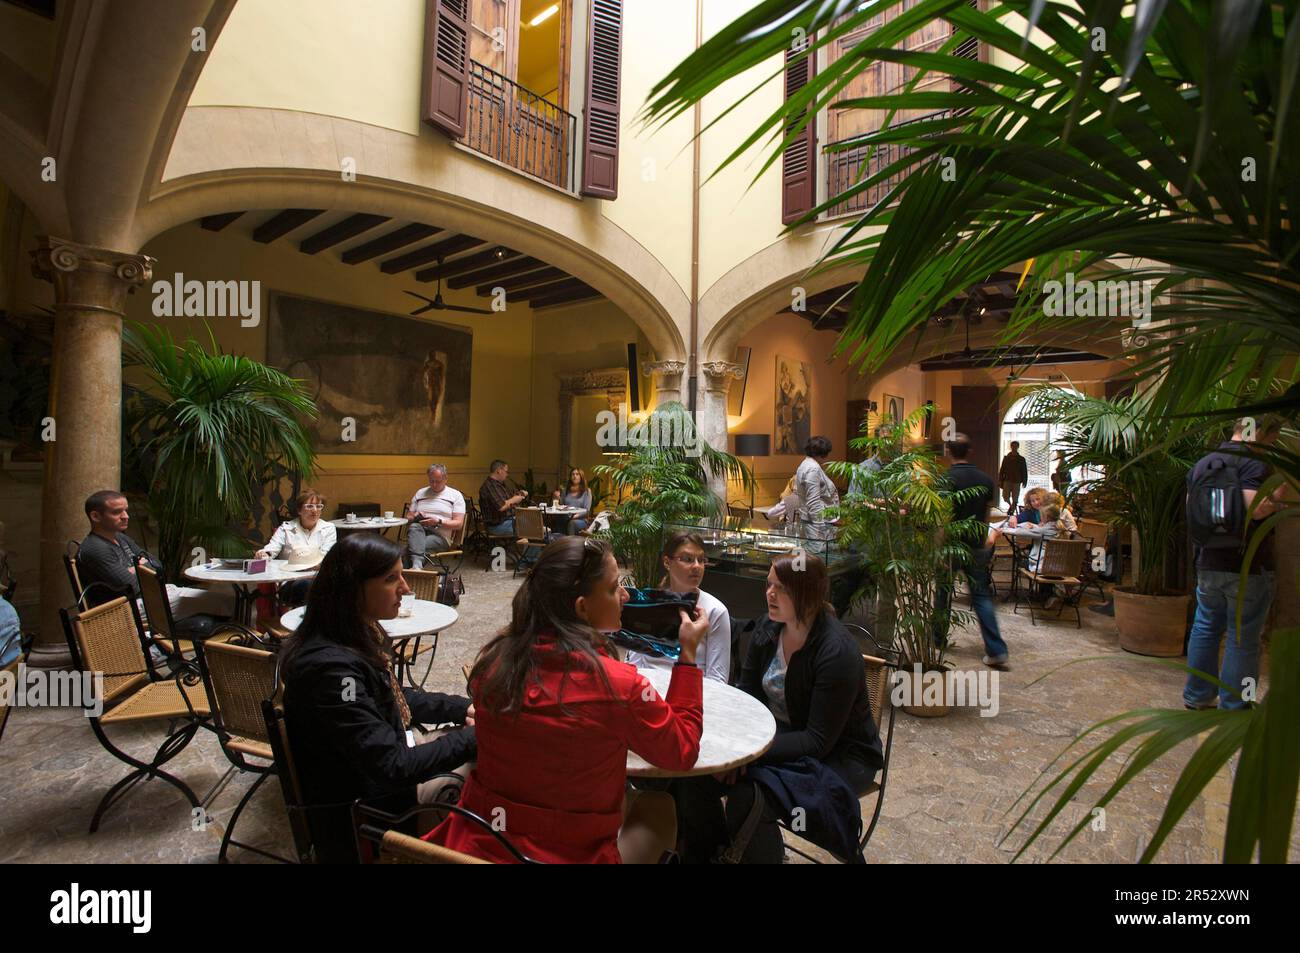 Guests in cafe, courtyard, old town of Palma, Majorca, Balearic Islands, Spain Stock Photo